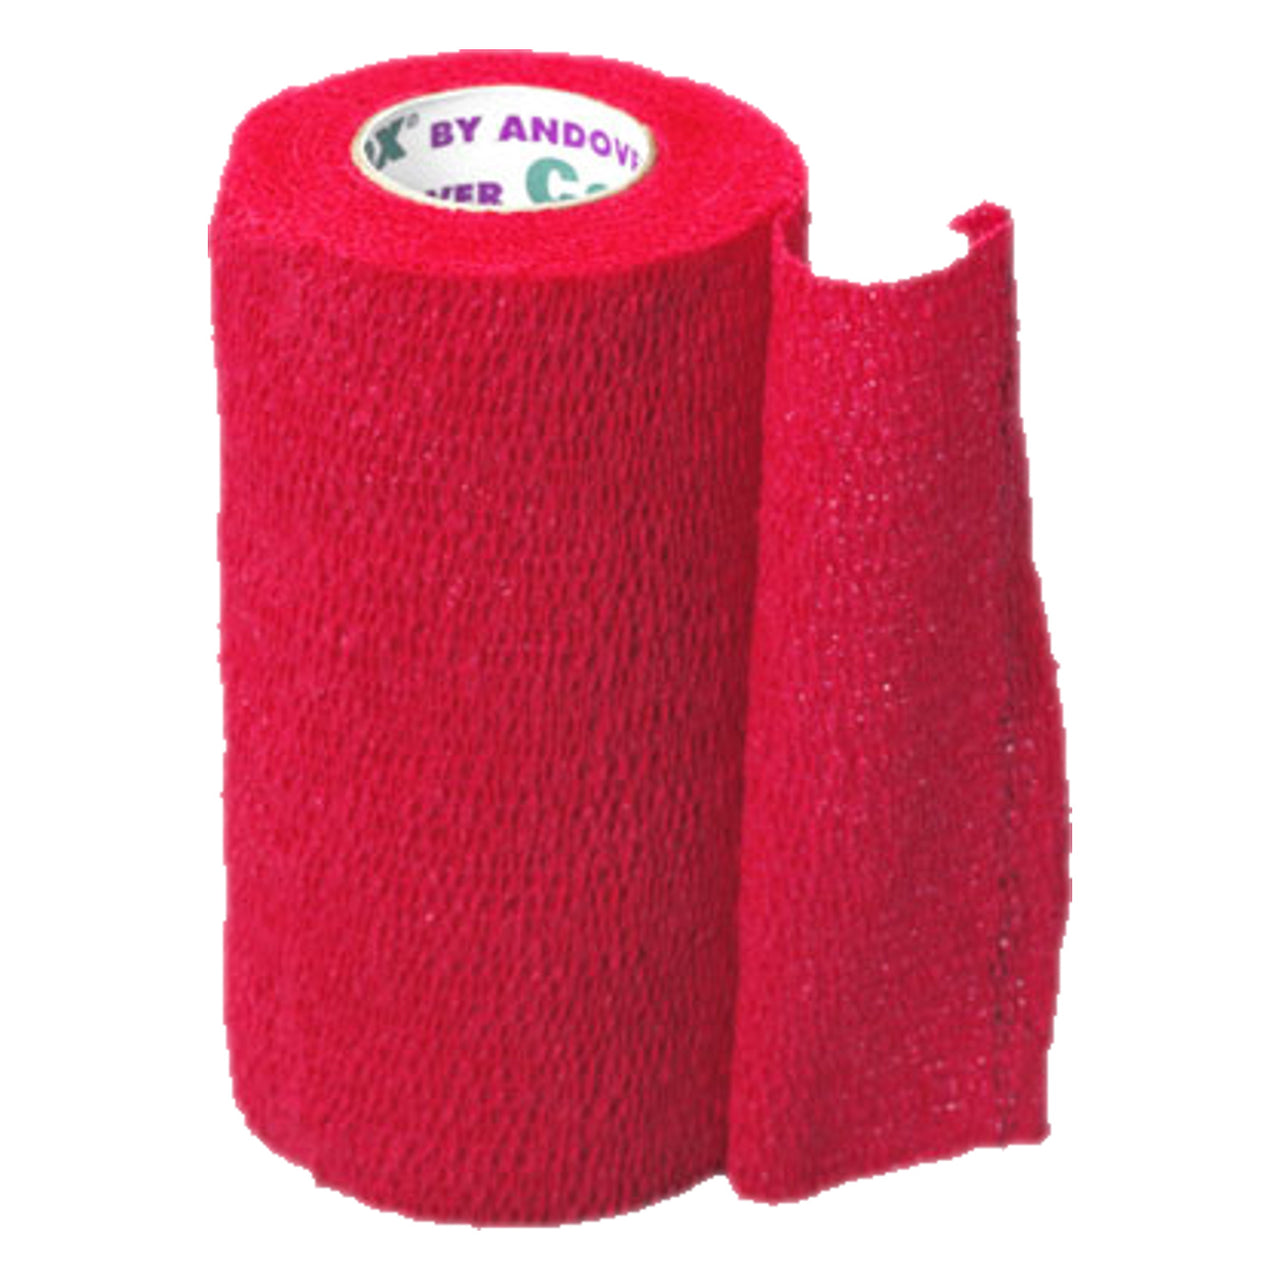 Andover Coflexvet 4X 15 Bandage (Red) - Red - Wound Dressing Andover - Canada